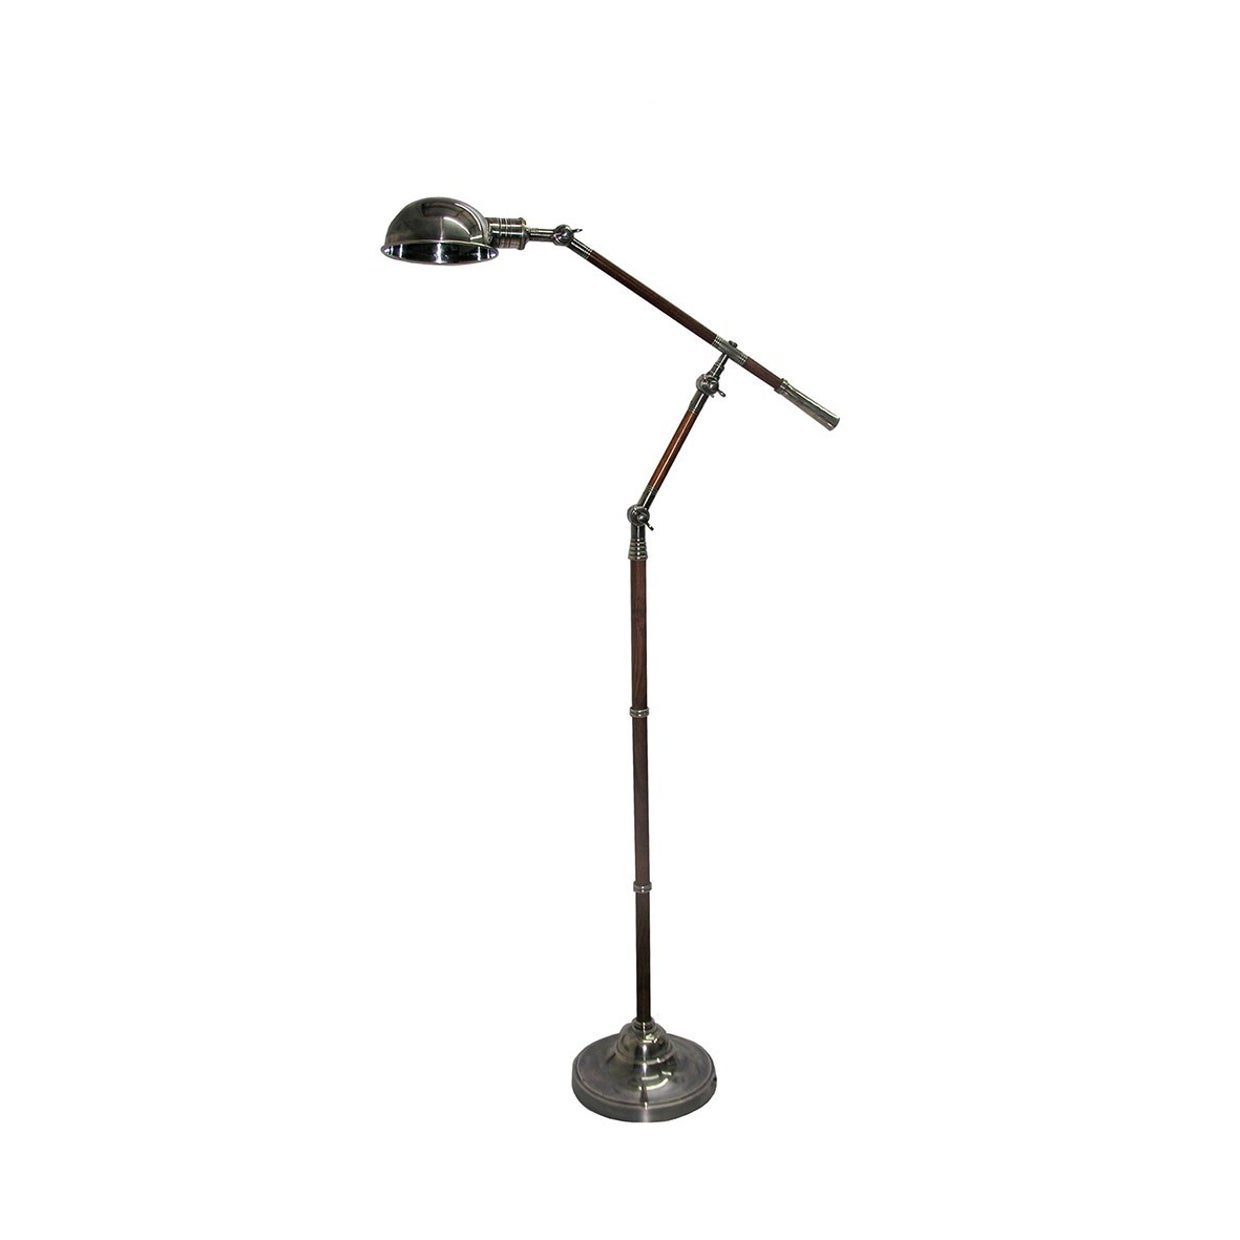 Silver Plated Adjustable floor lamp with wooden detail